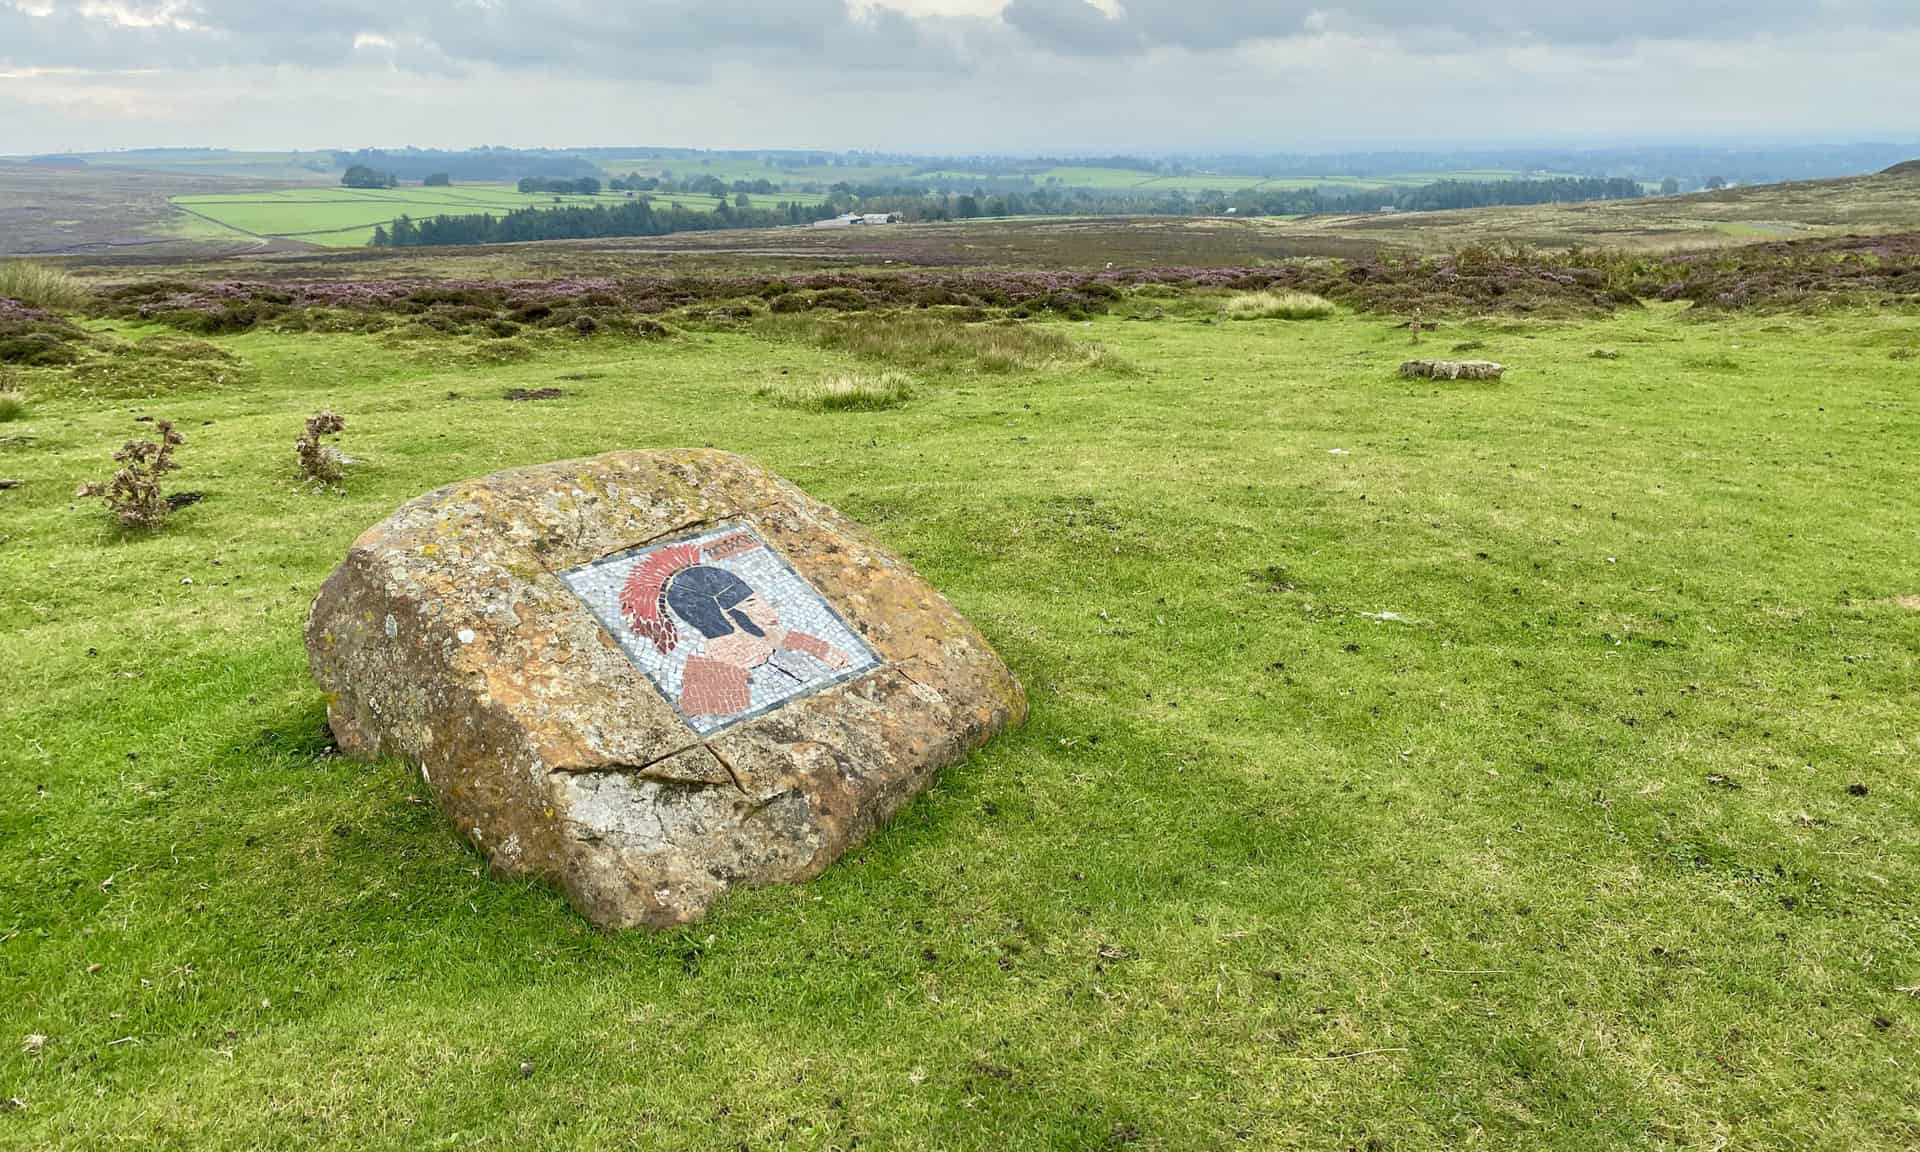 The Roman Soldier mosaic with Kirkby Malzeard Moor in the background. The halfway point of this Nidderdale walk.